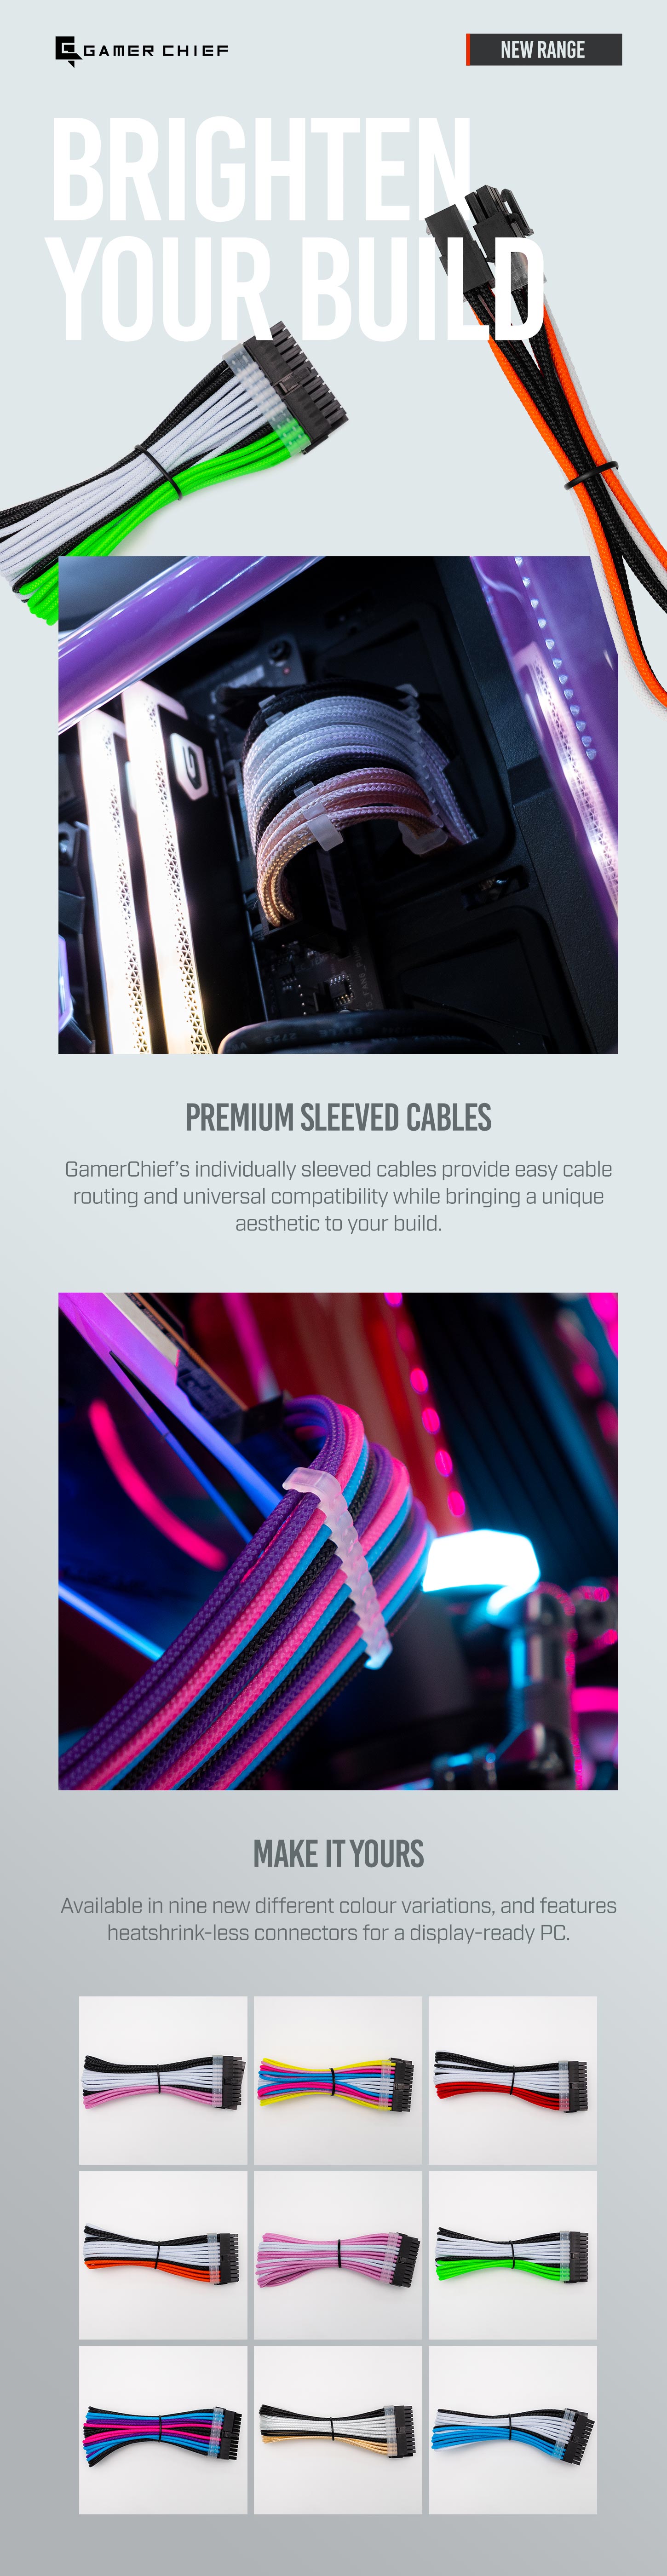 A large marketing image providing additional information about the product GamerChief Elite Series 8-Pin PCIe 30cm Sleeved Extension Cable (Pink/White) - Additional alt info not provided